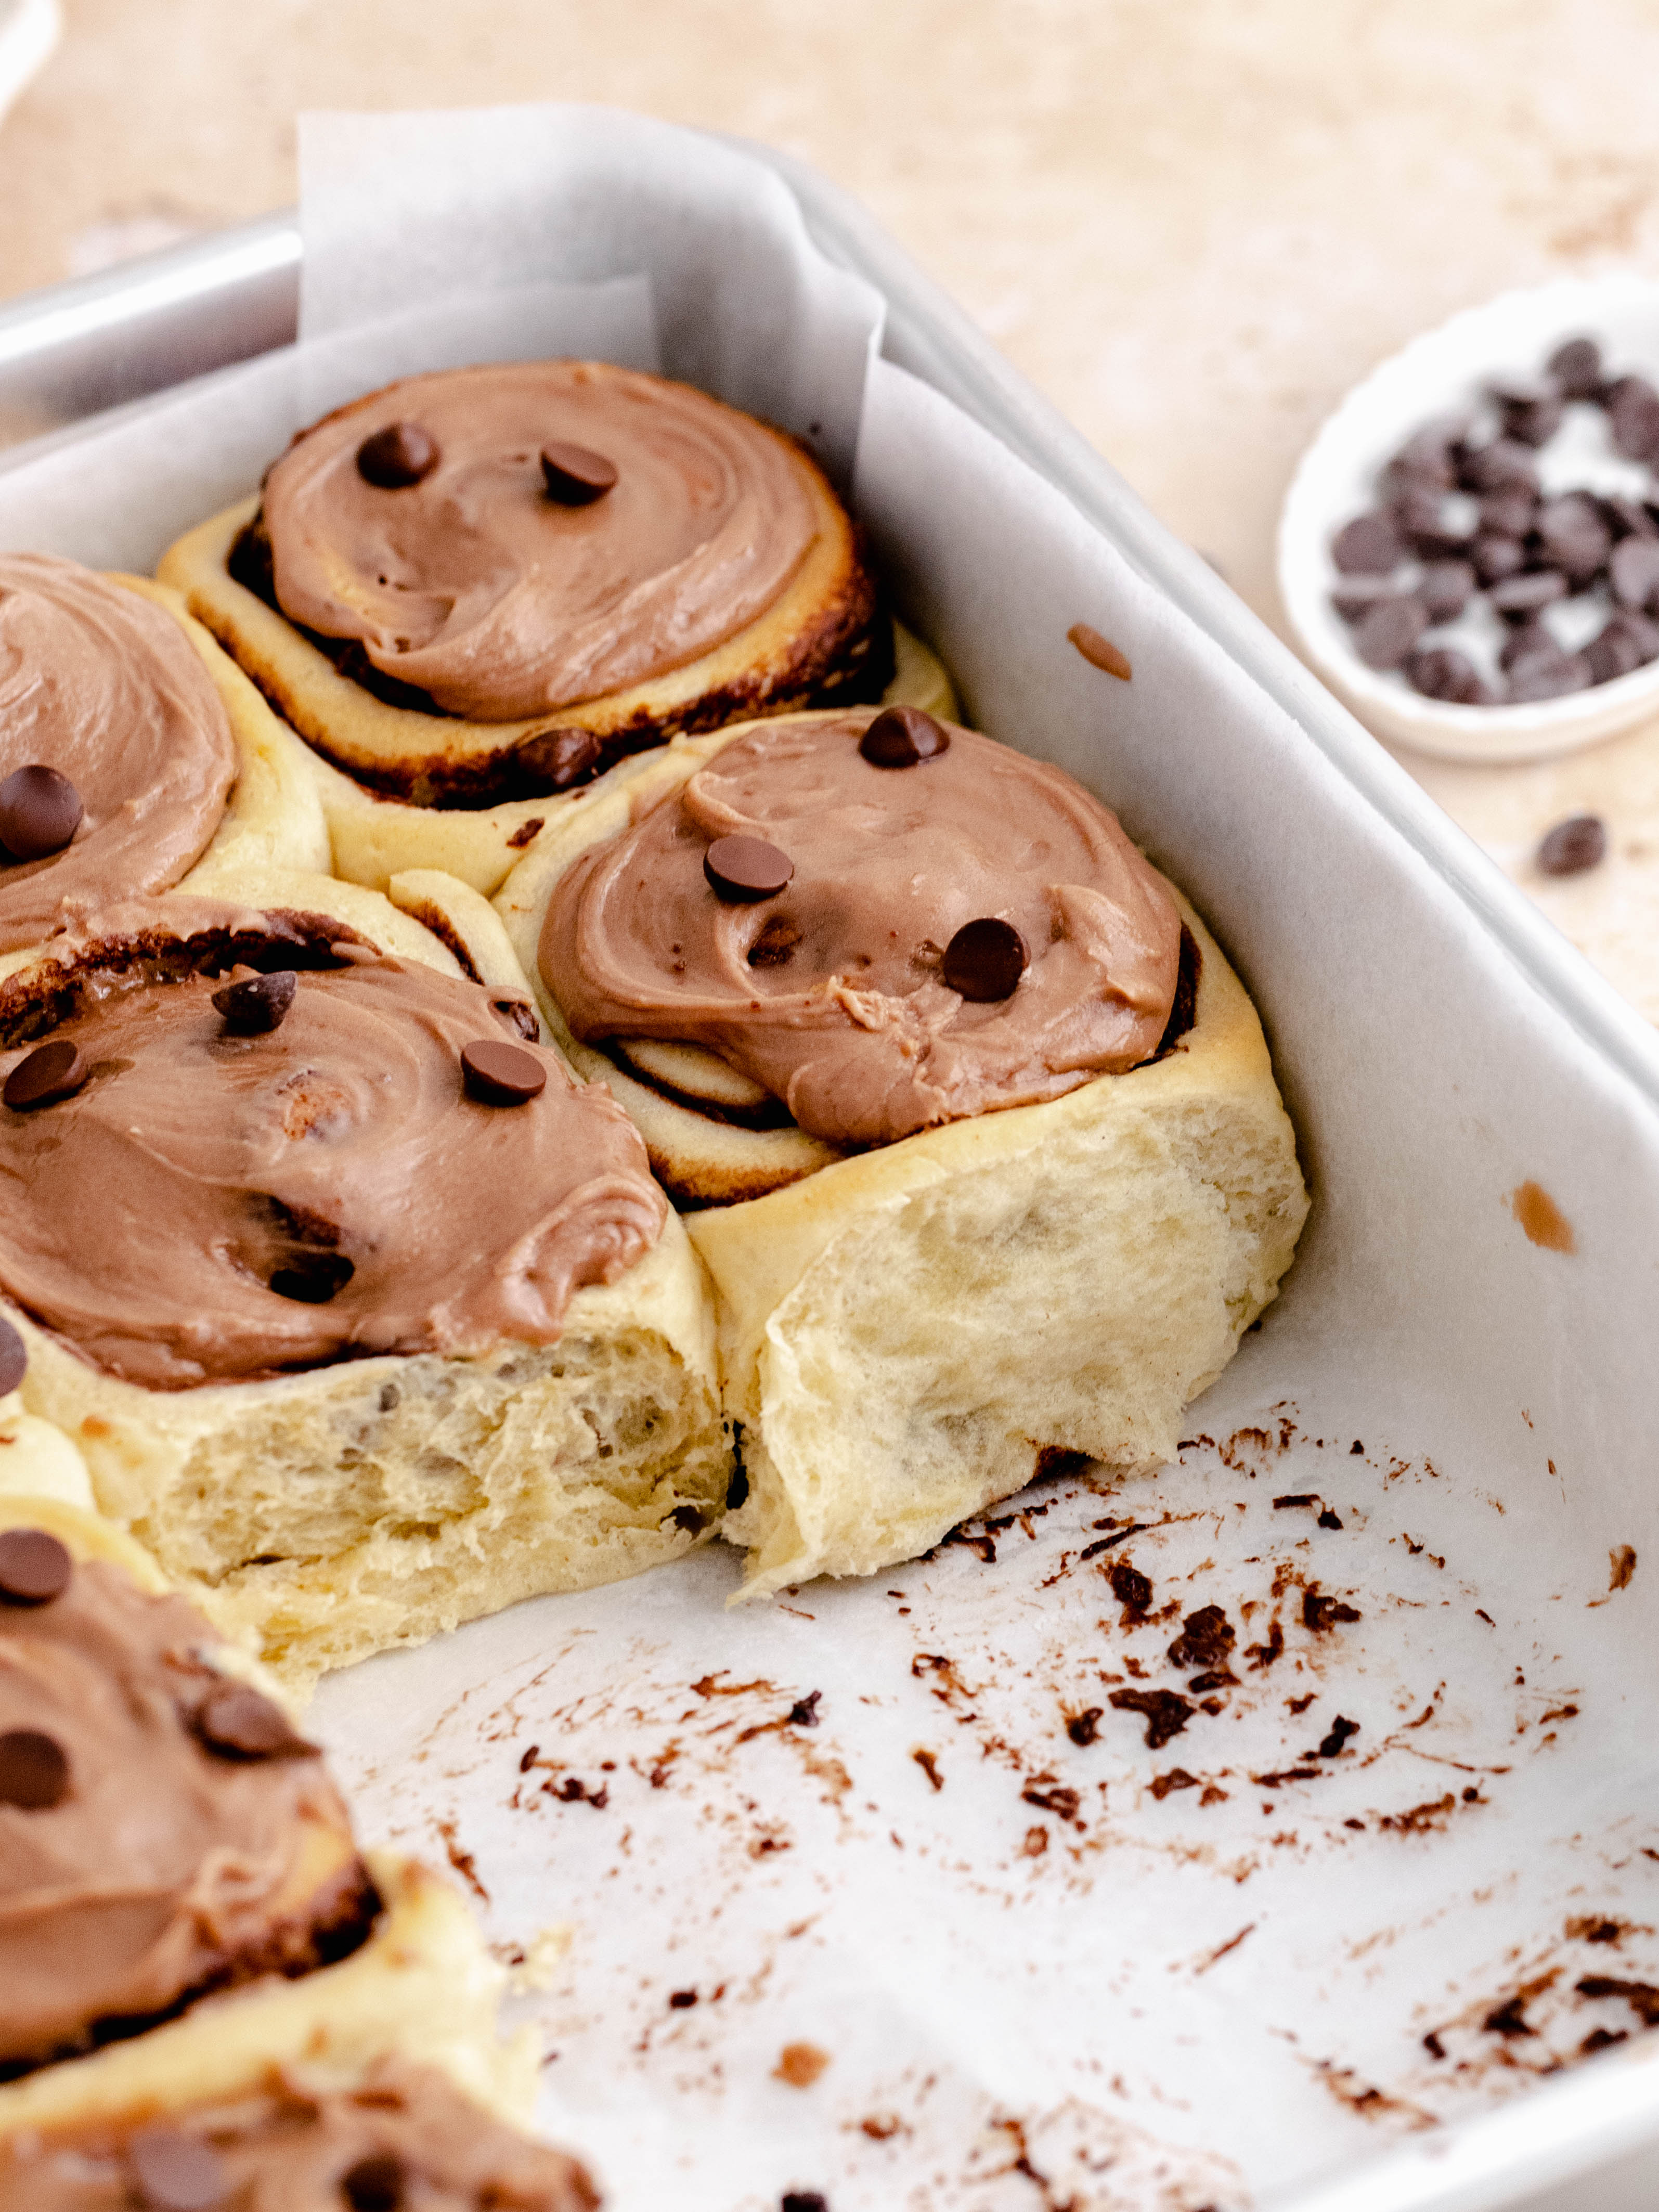 Nutella rolls in the baking pan.